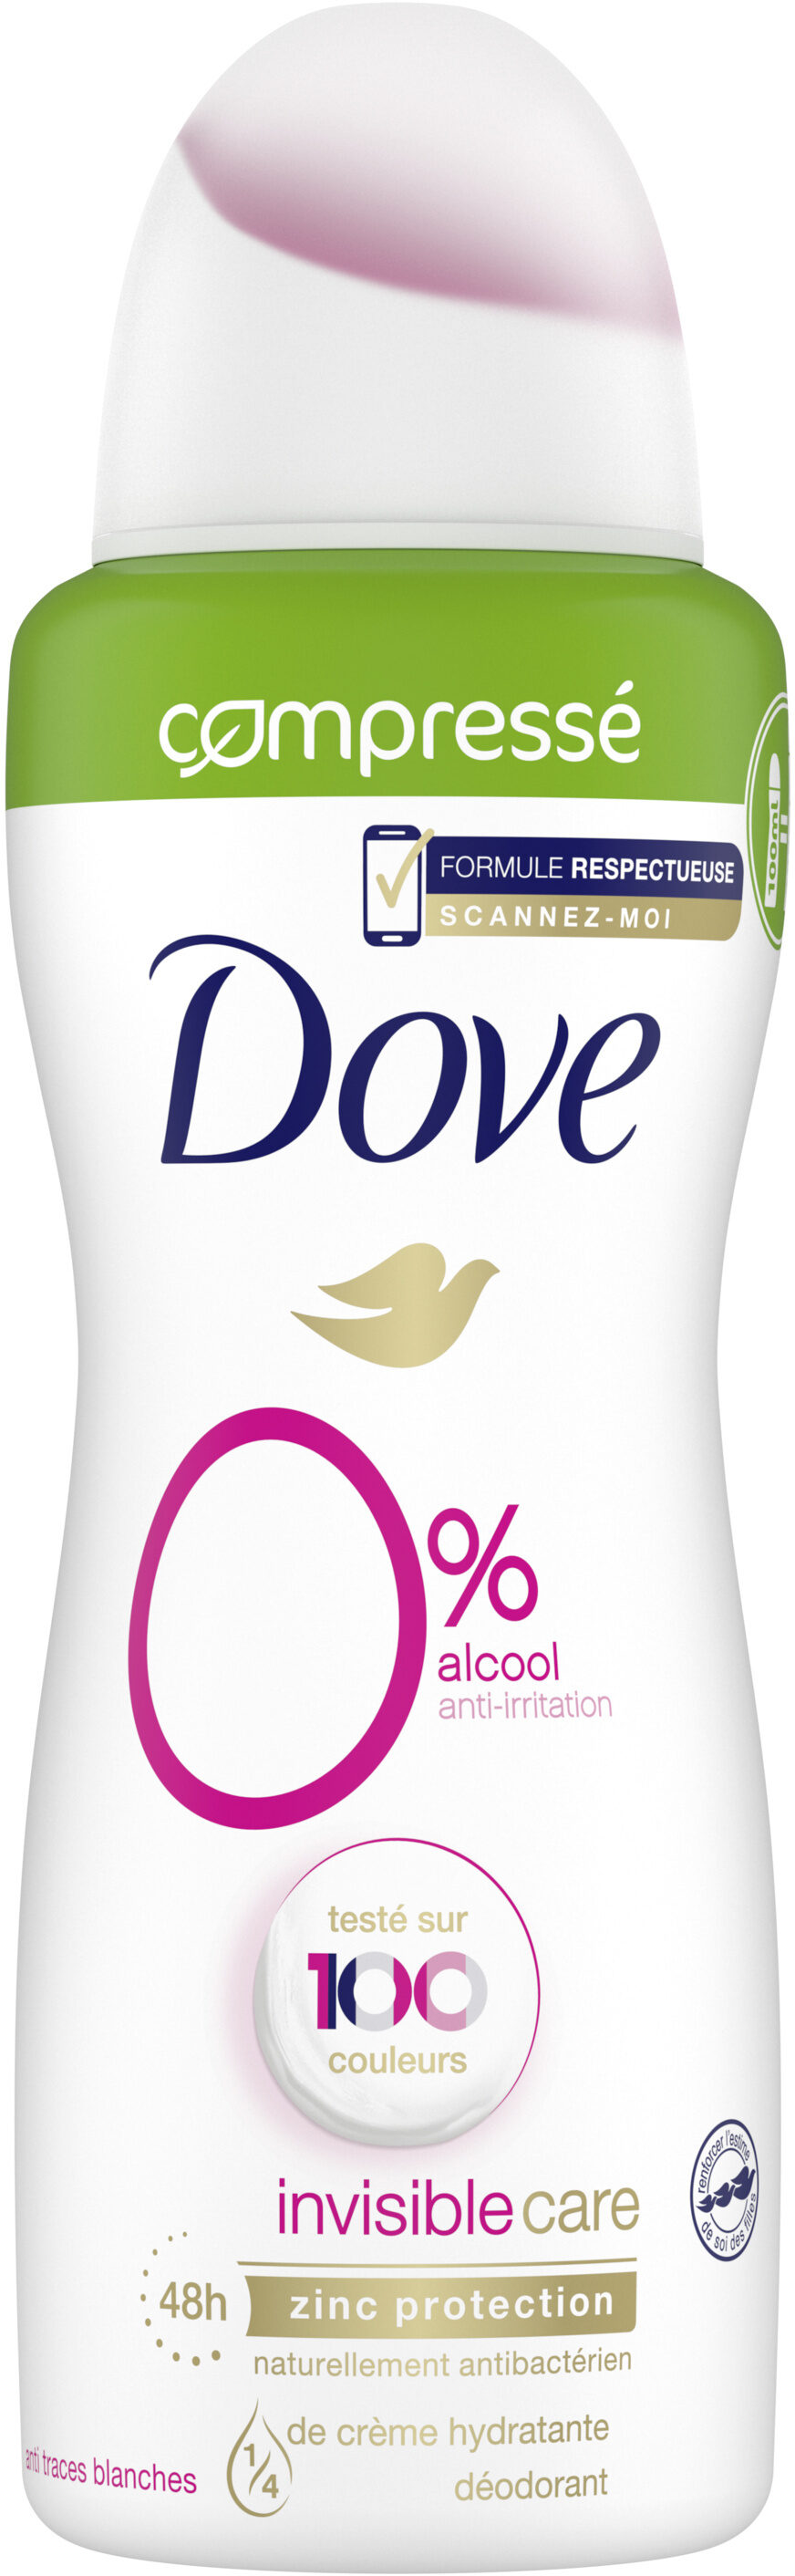 Dove Déodorant Femme Spray Anti-irritation Invisible Care - Product - fr